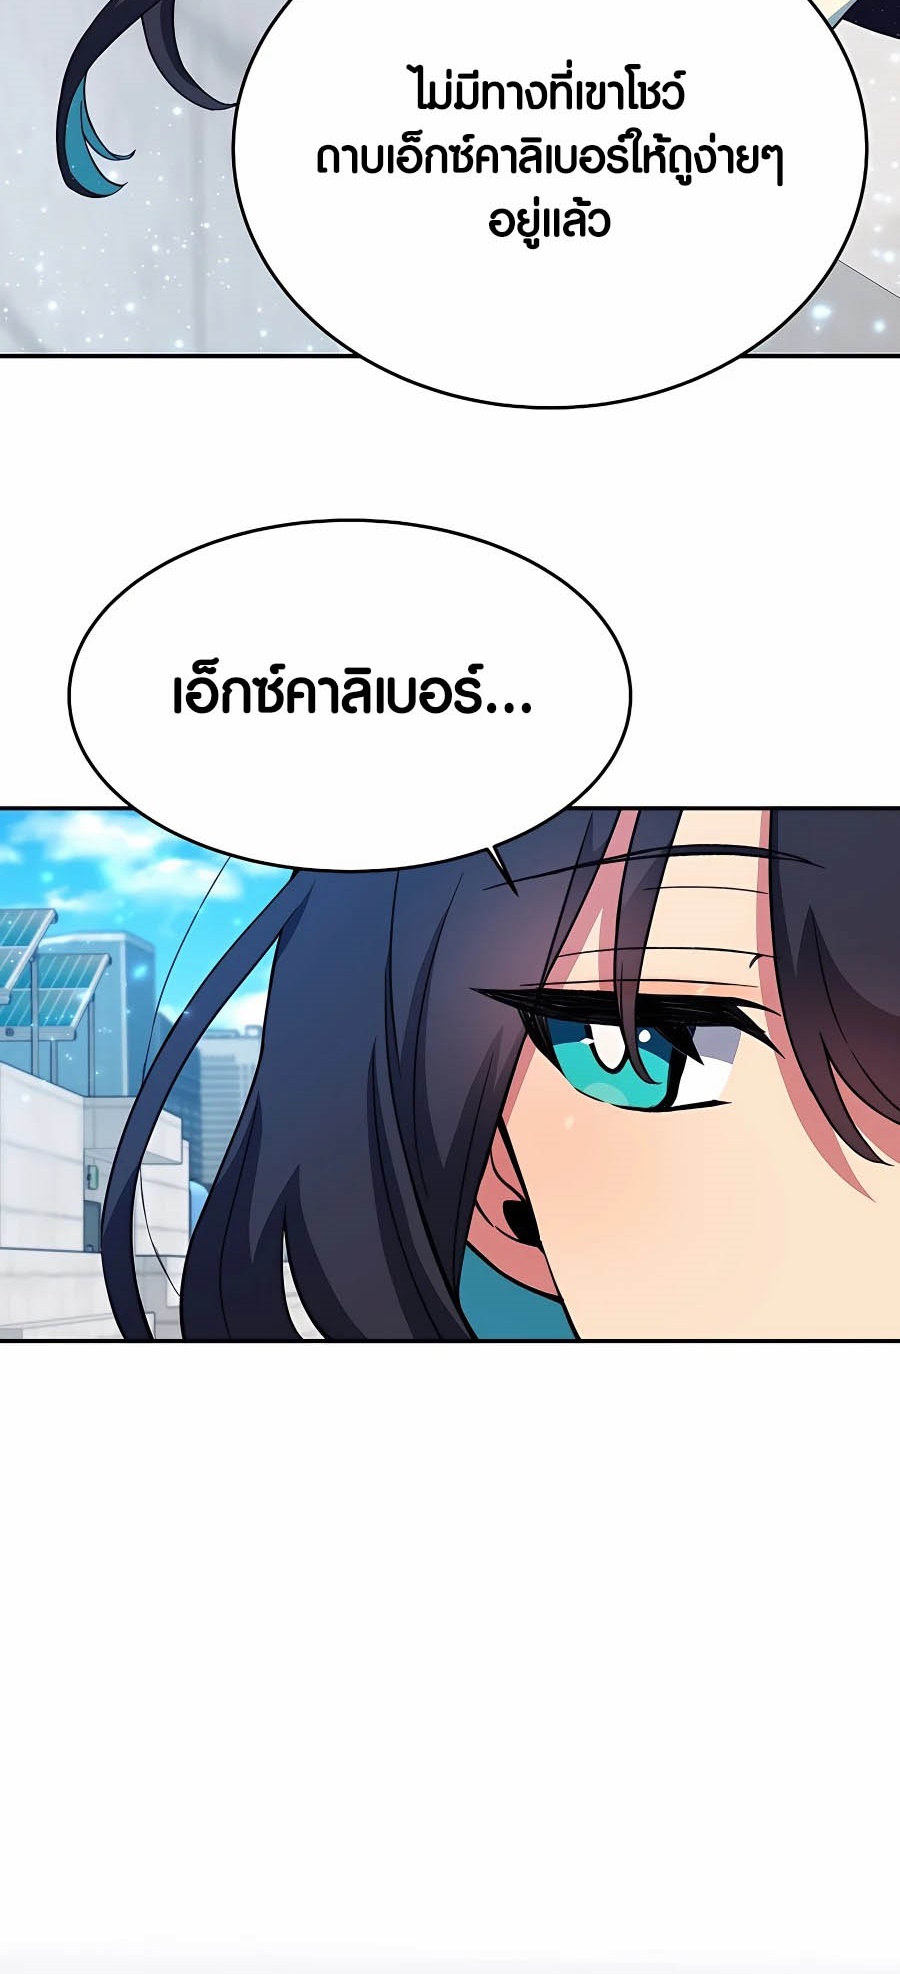 à¸­à¹ˆà¸²à¸™à¸¡à¸±à¸™à¸®à¸§à¸² à¹€à¸£à¸·à¹ˆà¸­à¸‡ The Part Time Land of the Gods 56 45